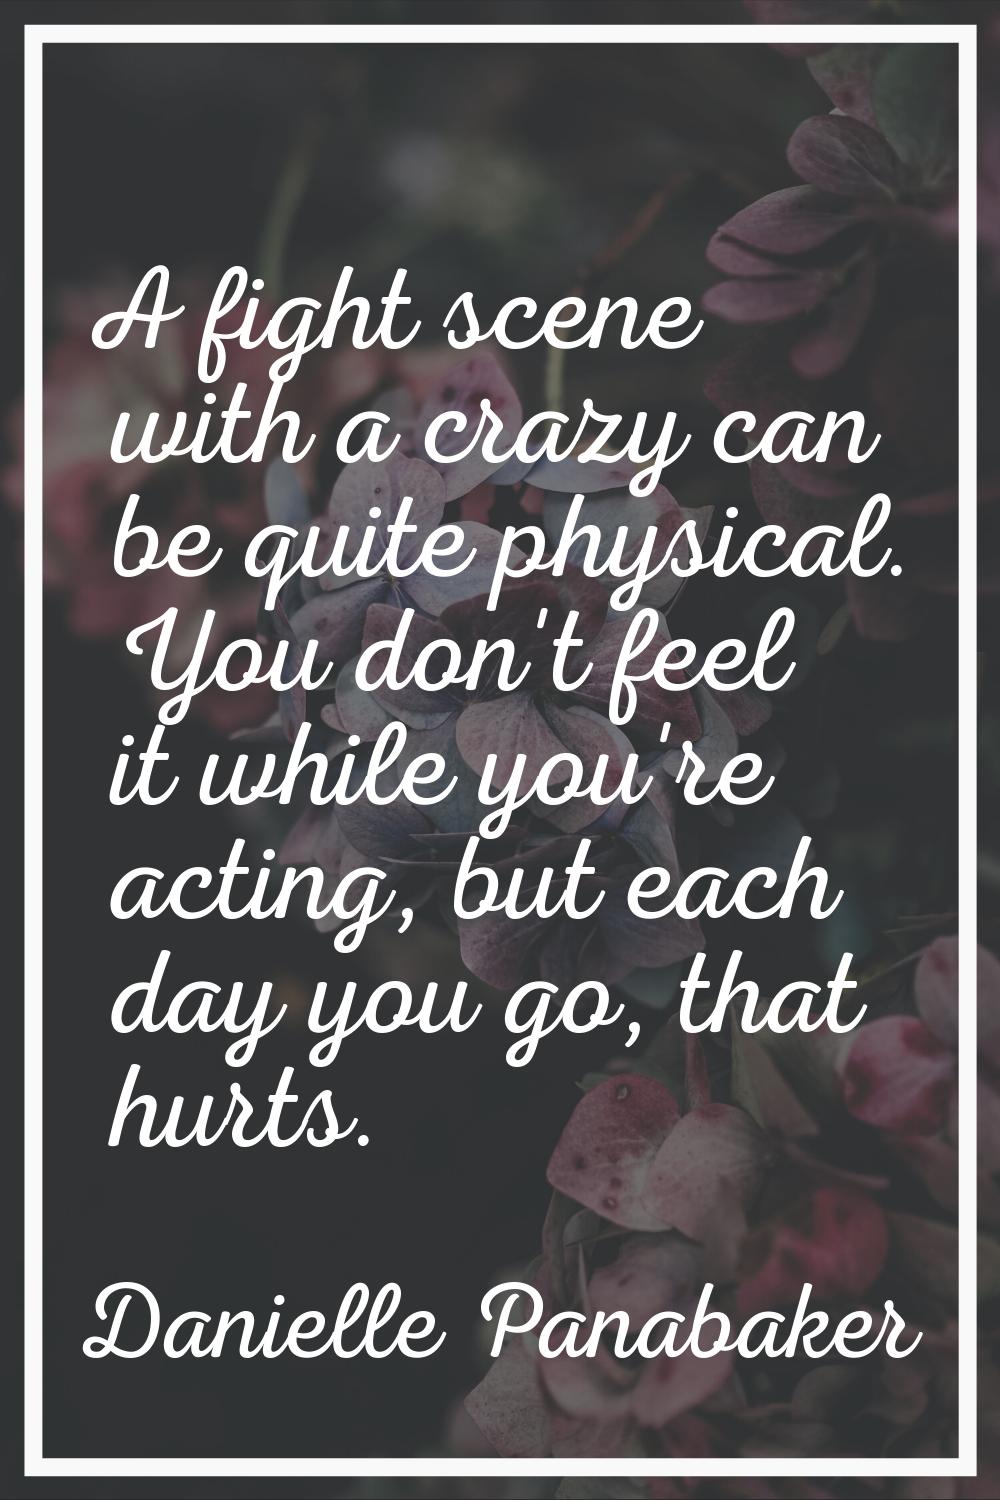 A fight scene with a crazy can be quite physical. You don't feel it while you're acting, but each d